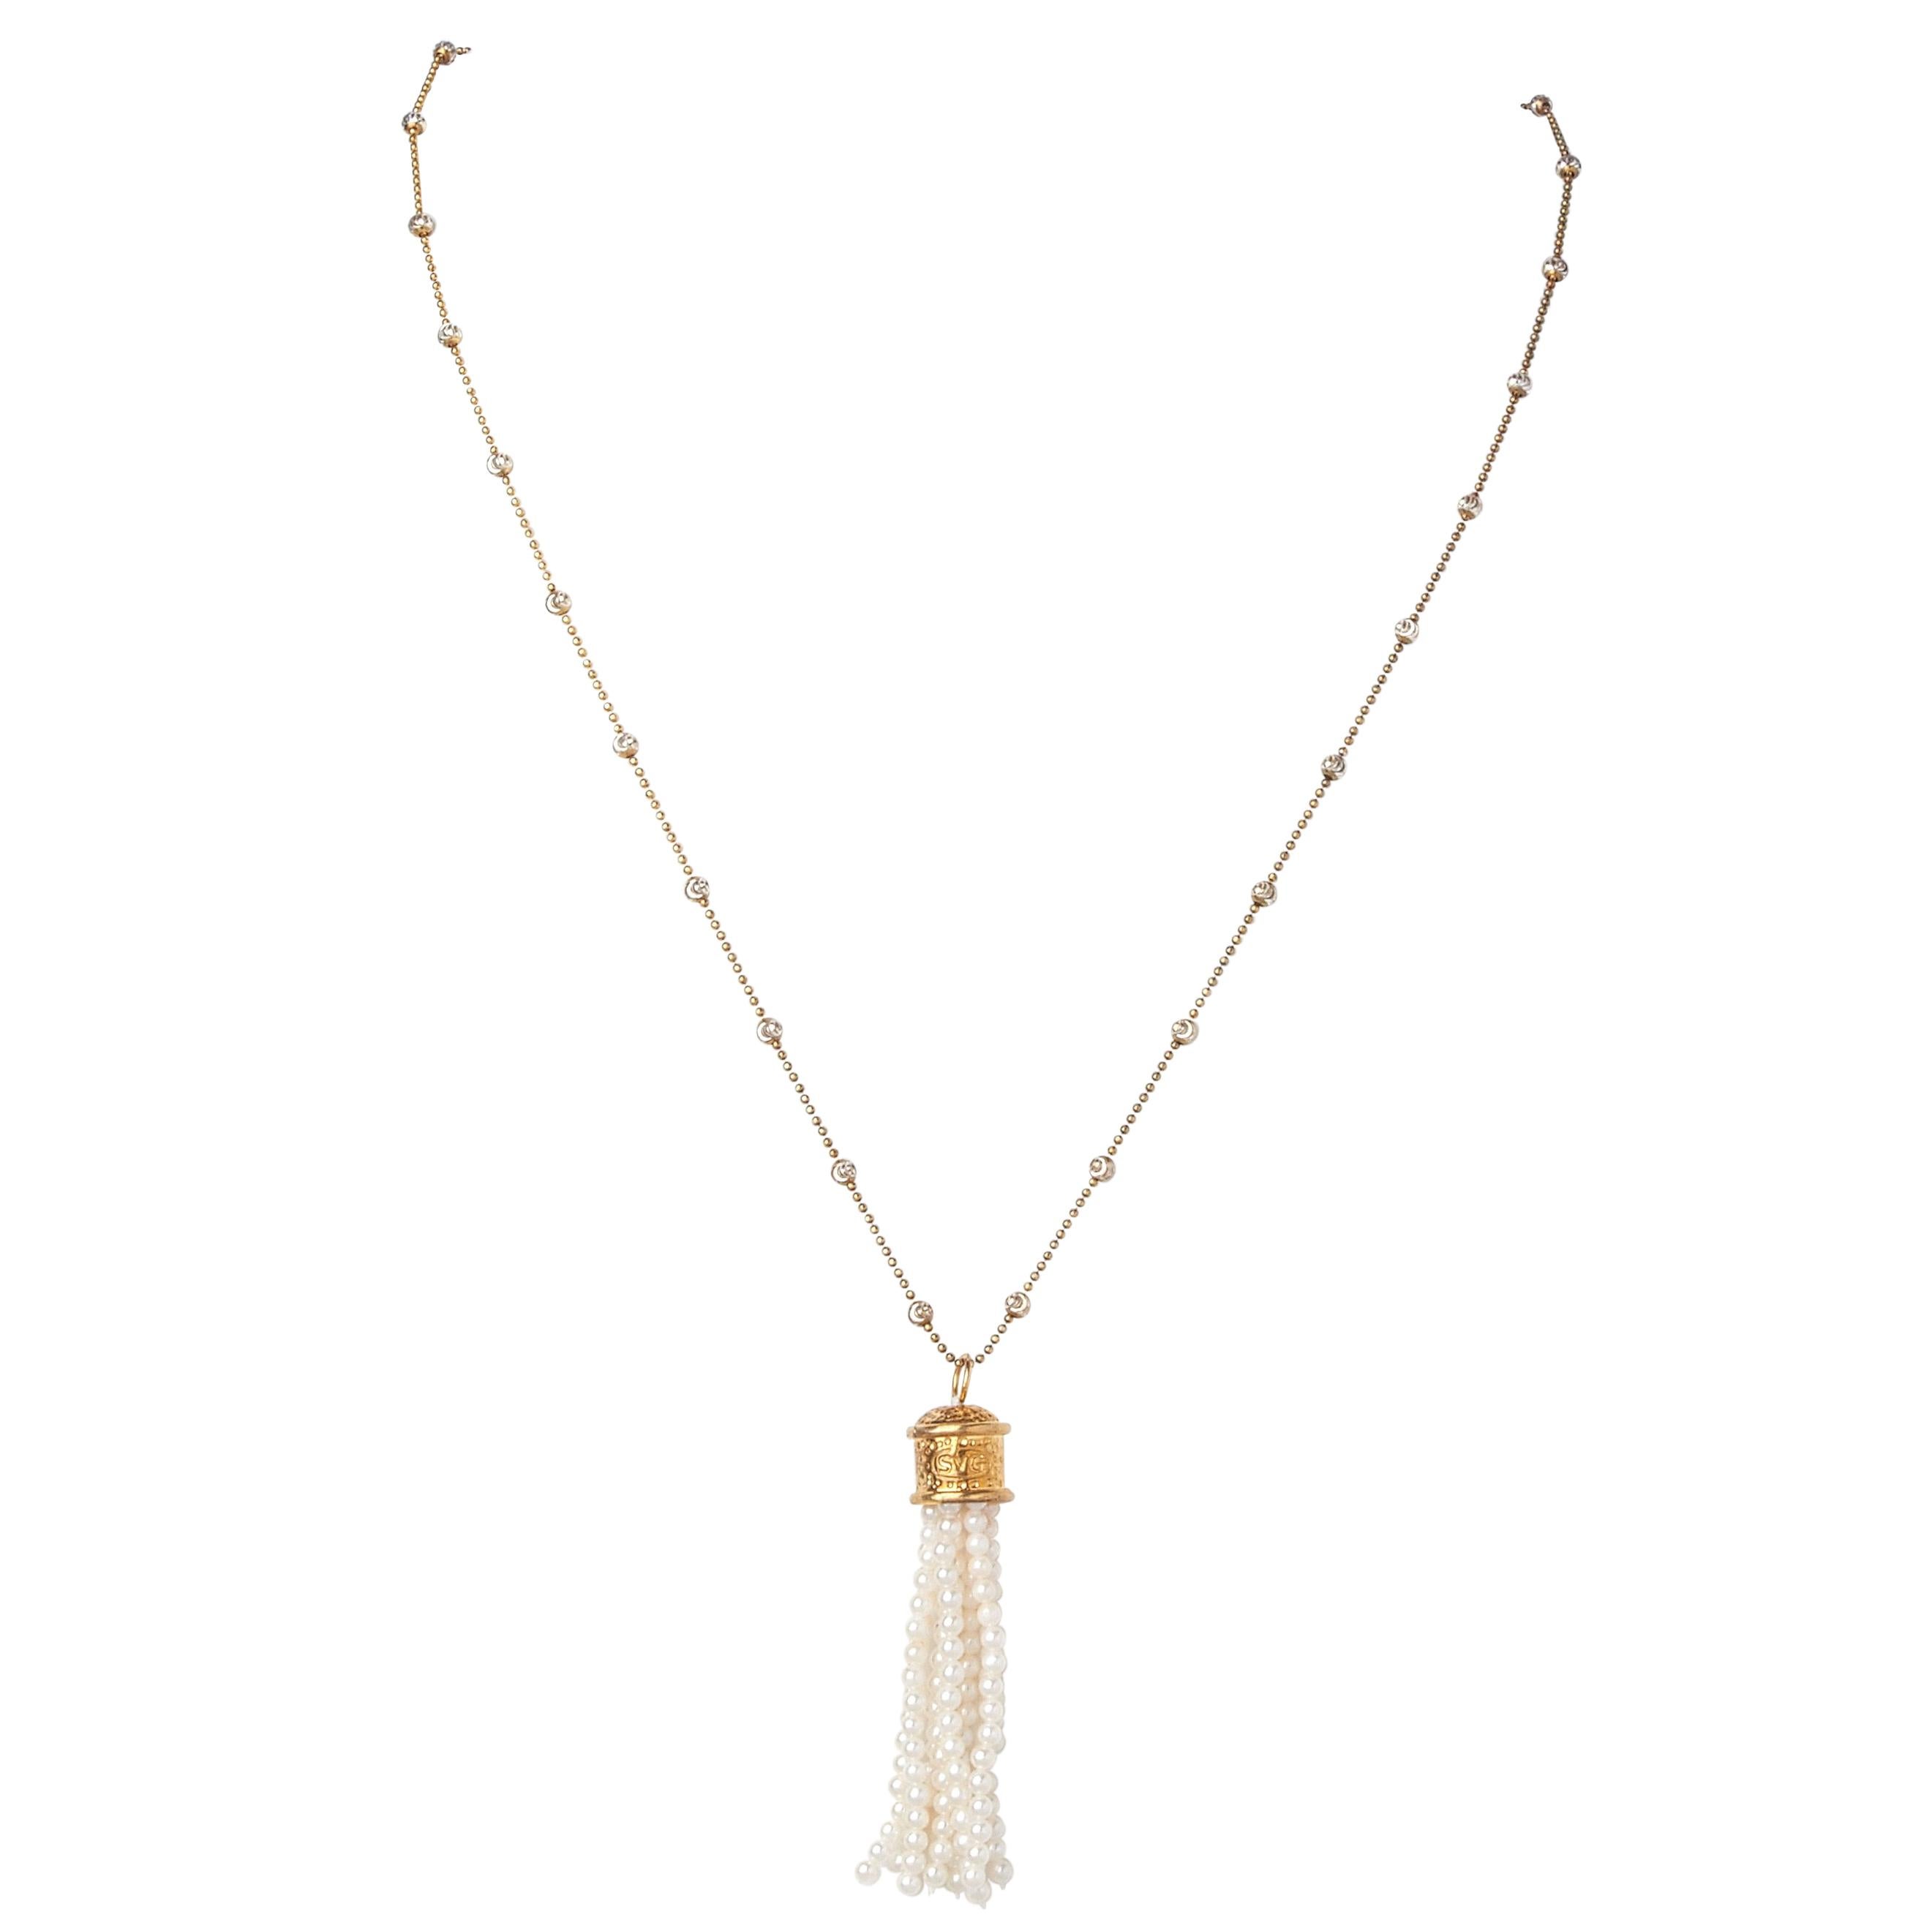 Pearl Tassel Pendant Yellow Gold on Sterling Silver Beaded Chain Necklace  